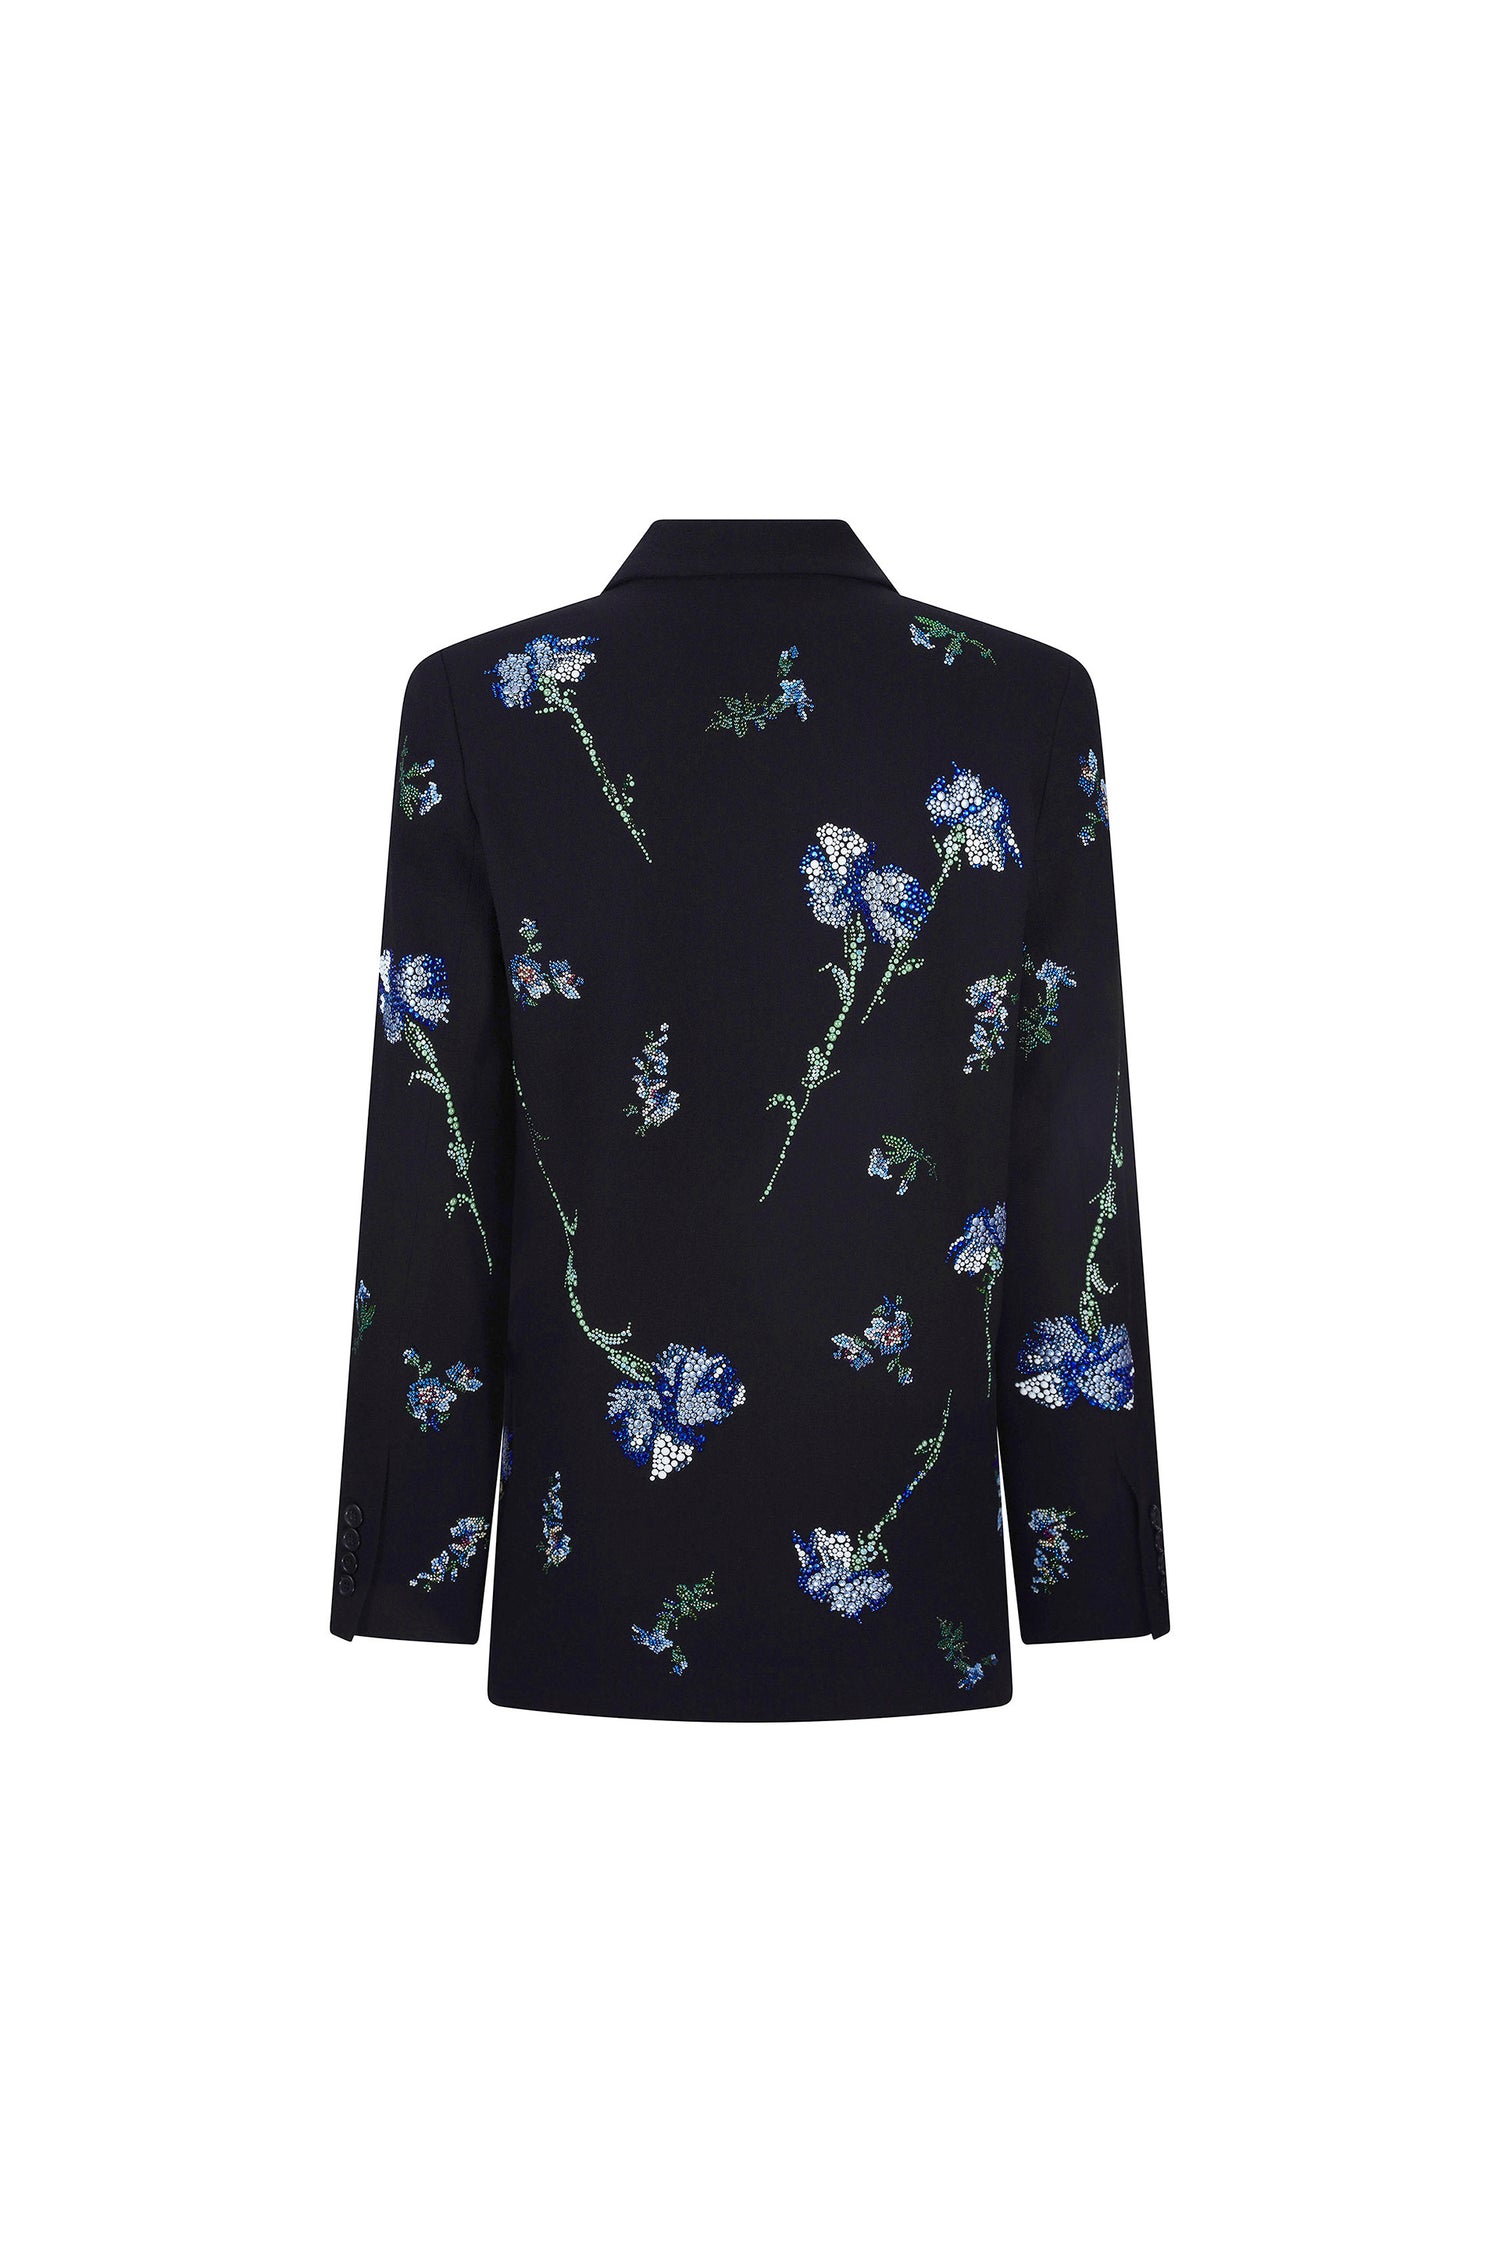 'CECIL BEATON BLUE CARNATION' DOUBLE BREASTED JACKET -  - Libertine